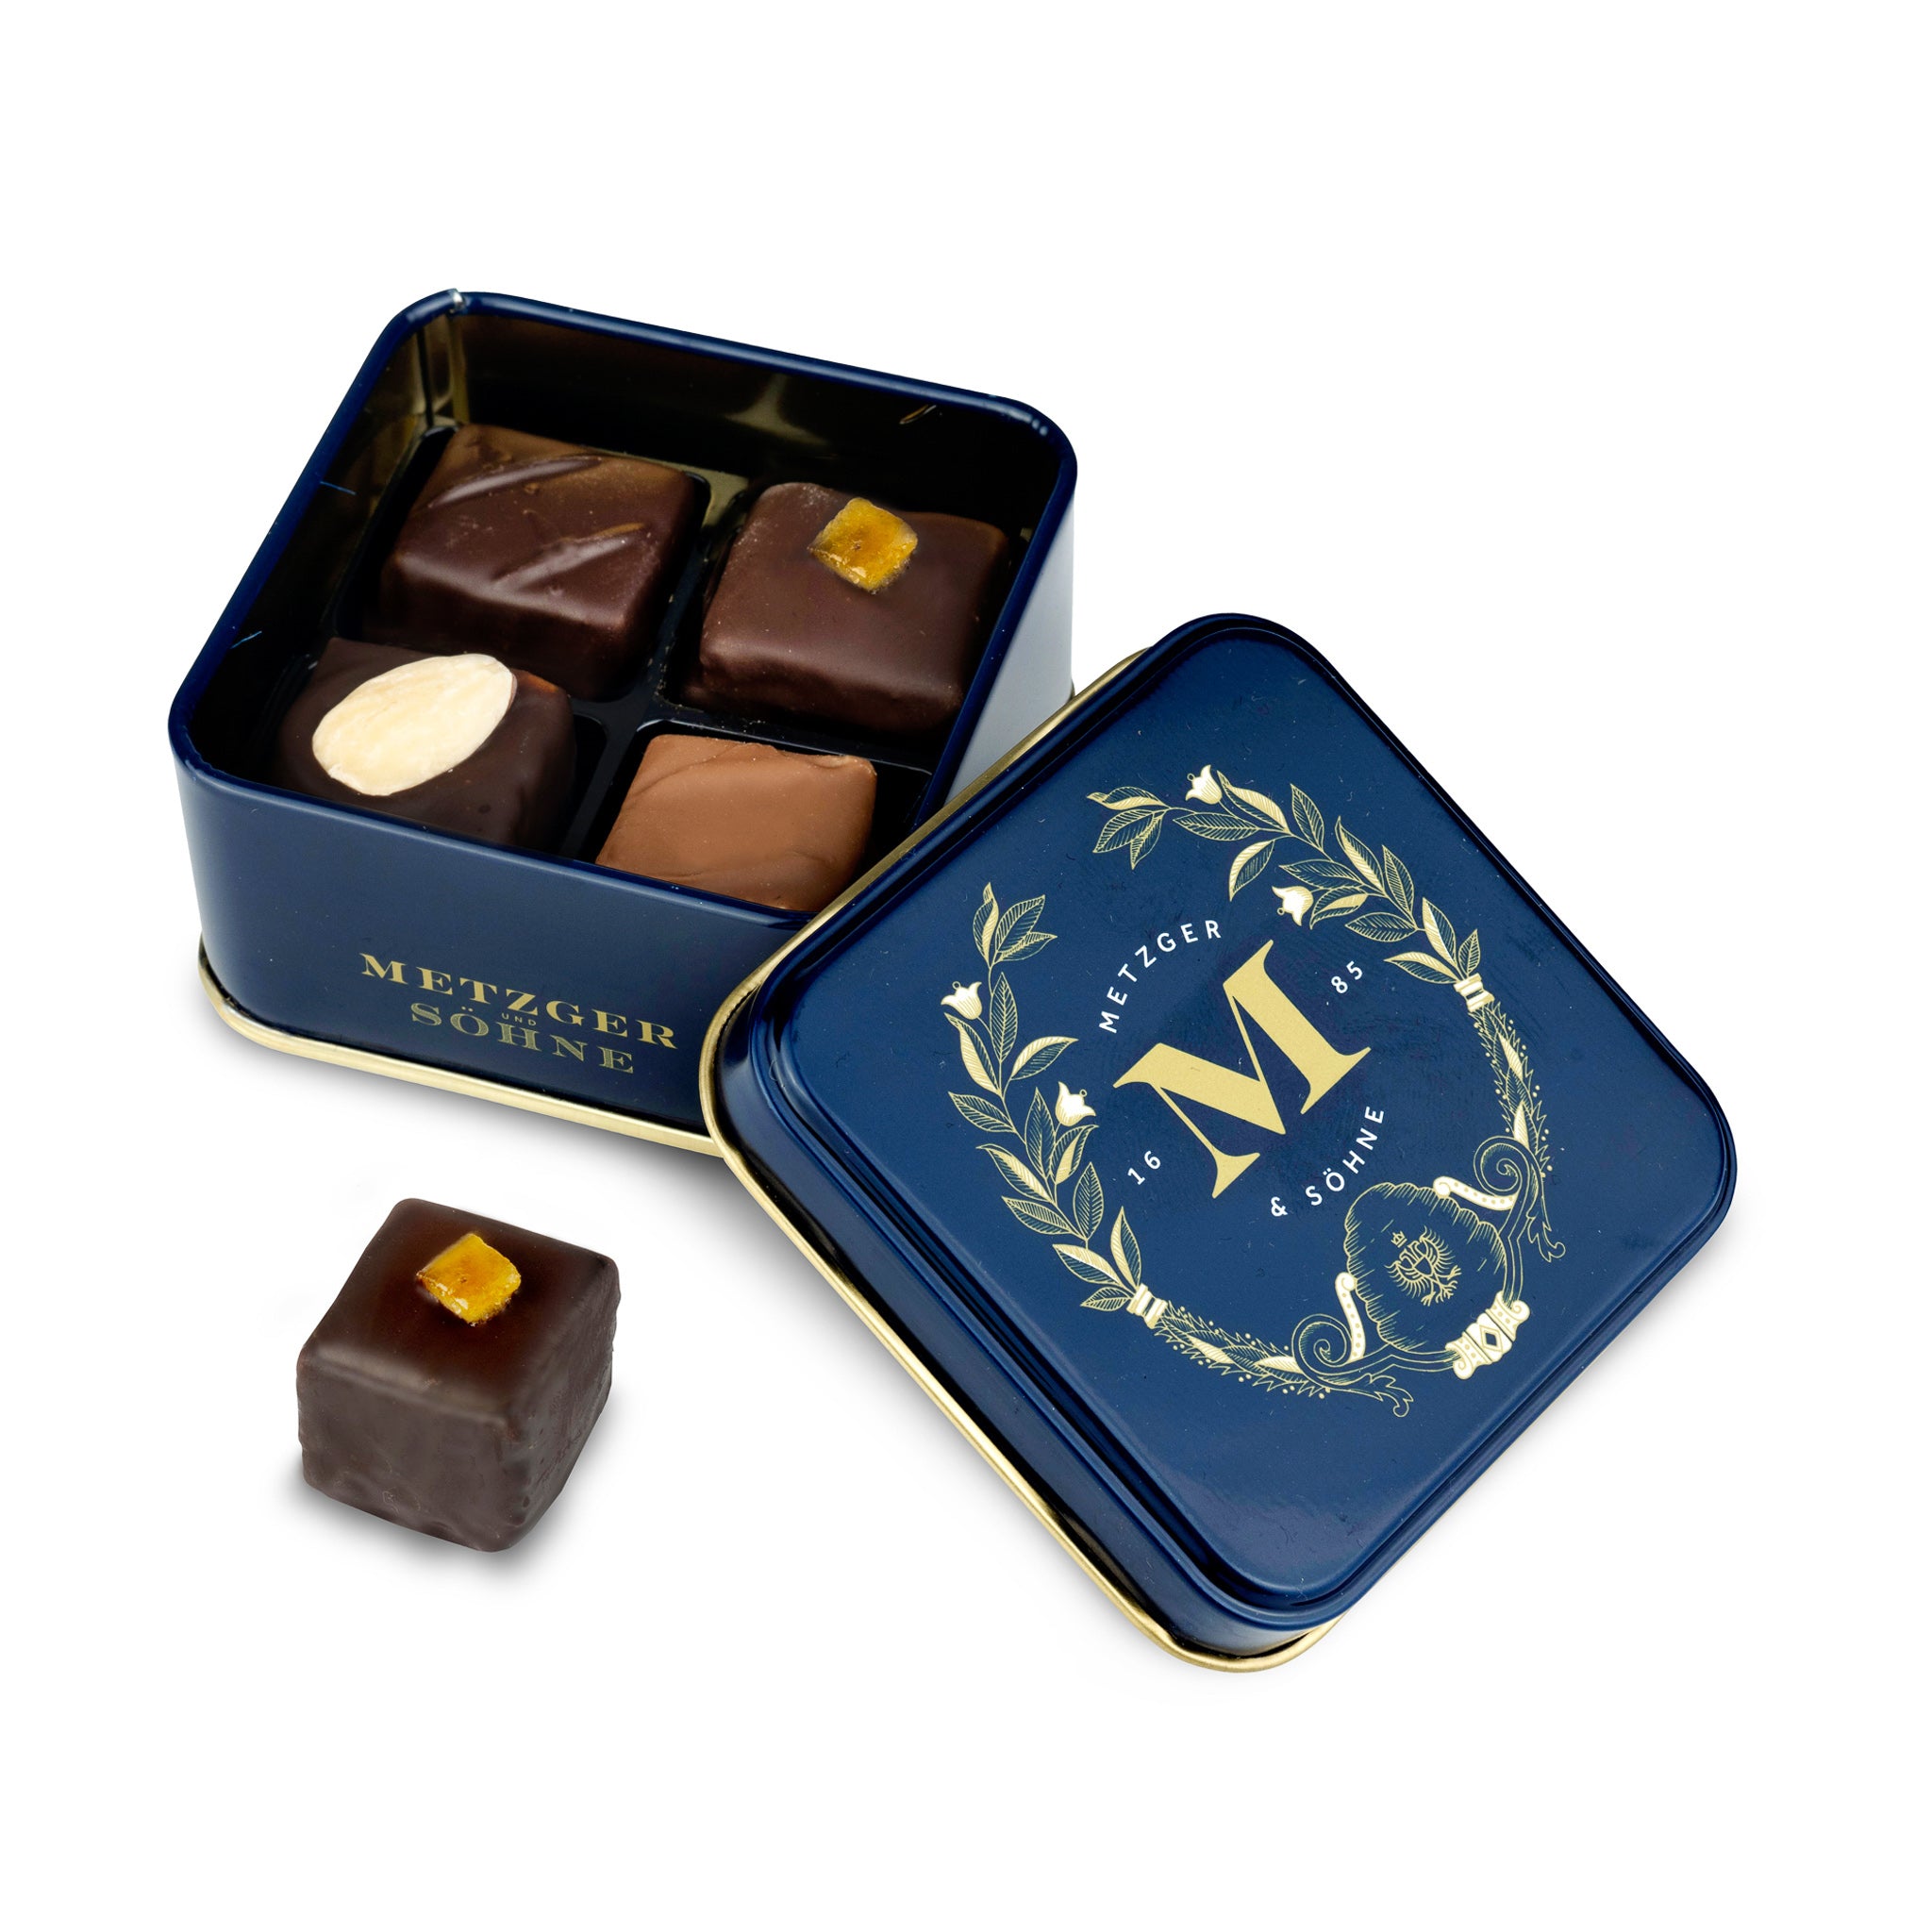 Petit Metzger signature tin in blue filled with 4 different Lebkuchen 'honey cake' pralines.